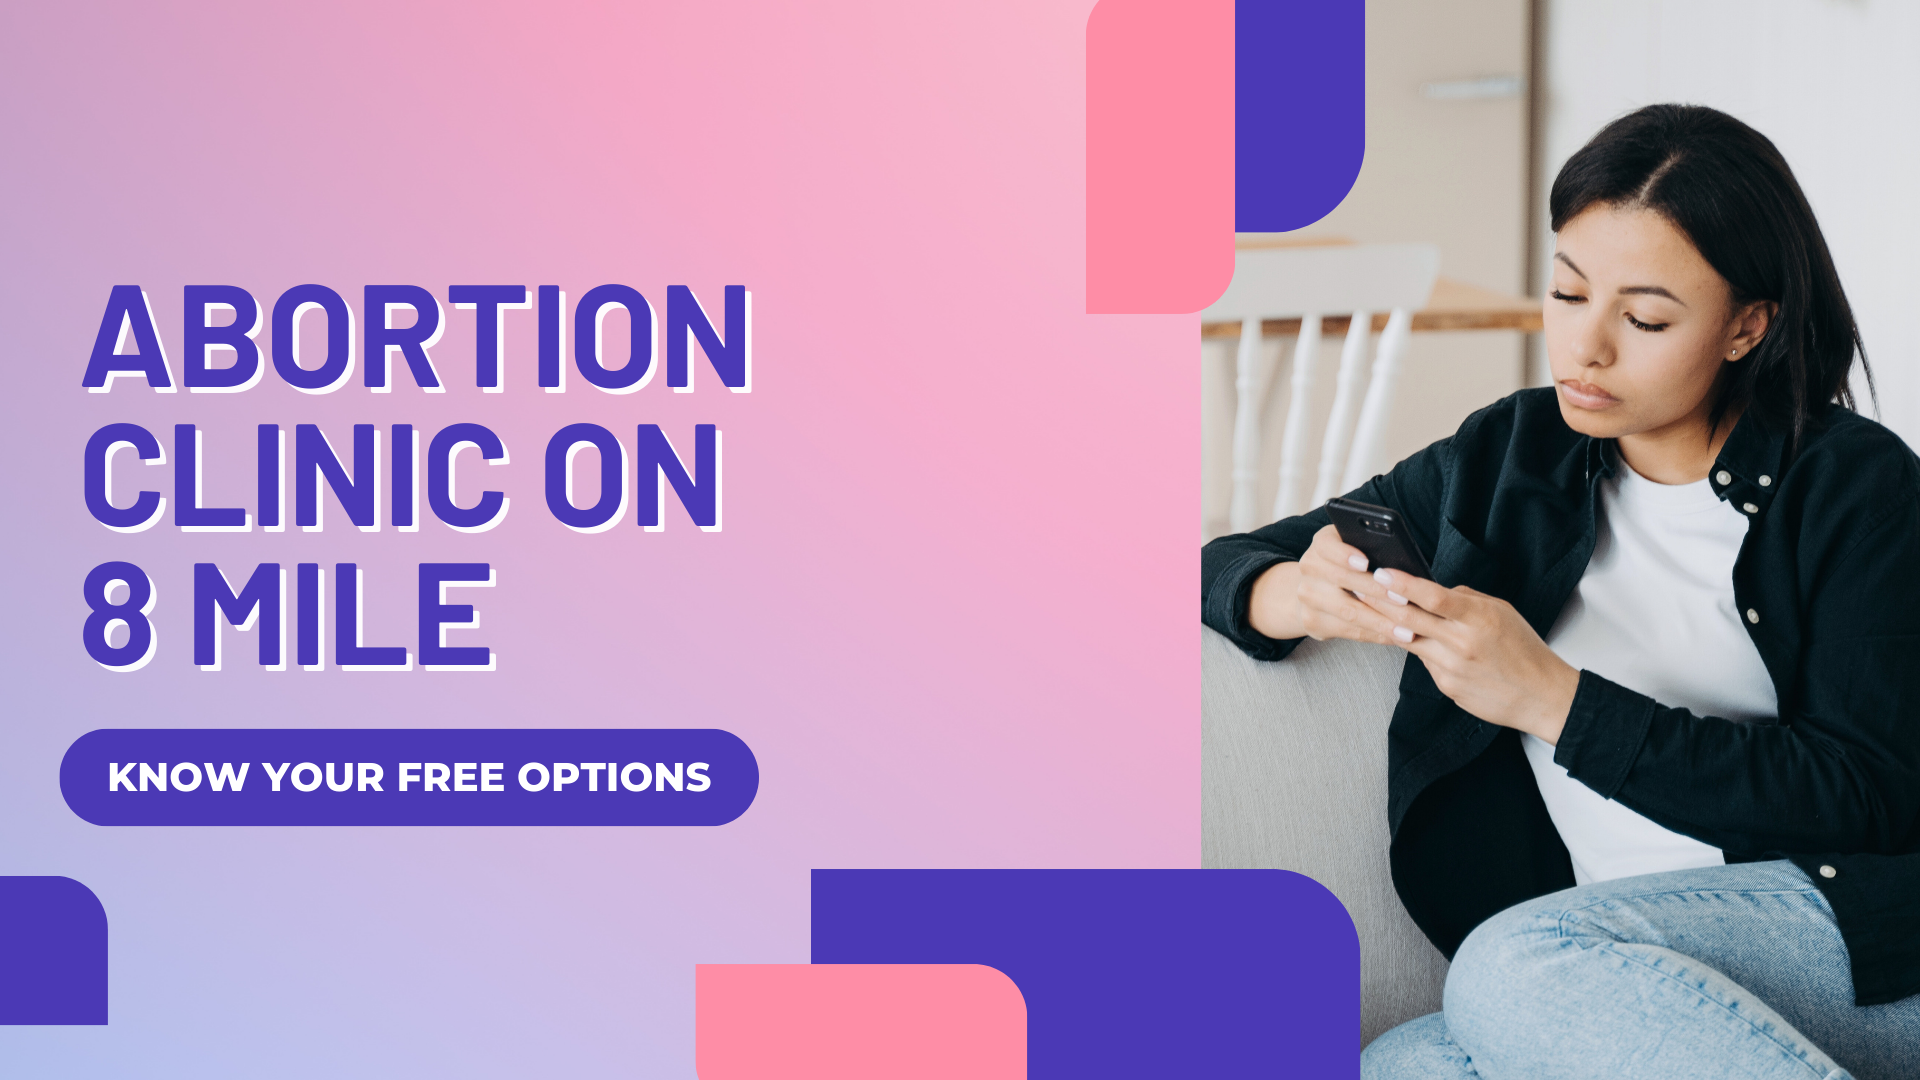 Seeking an abortion clinic on 8 Mile? Get a free ultrasound first with the Problem Pregnancy Center to confirm pregnancy and learn about all of your free options. 